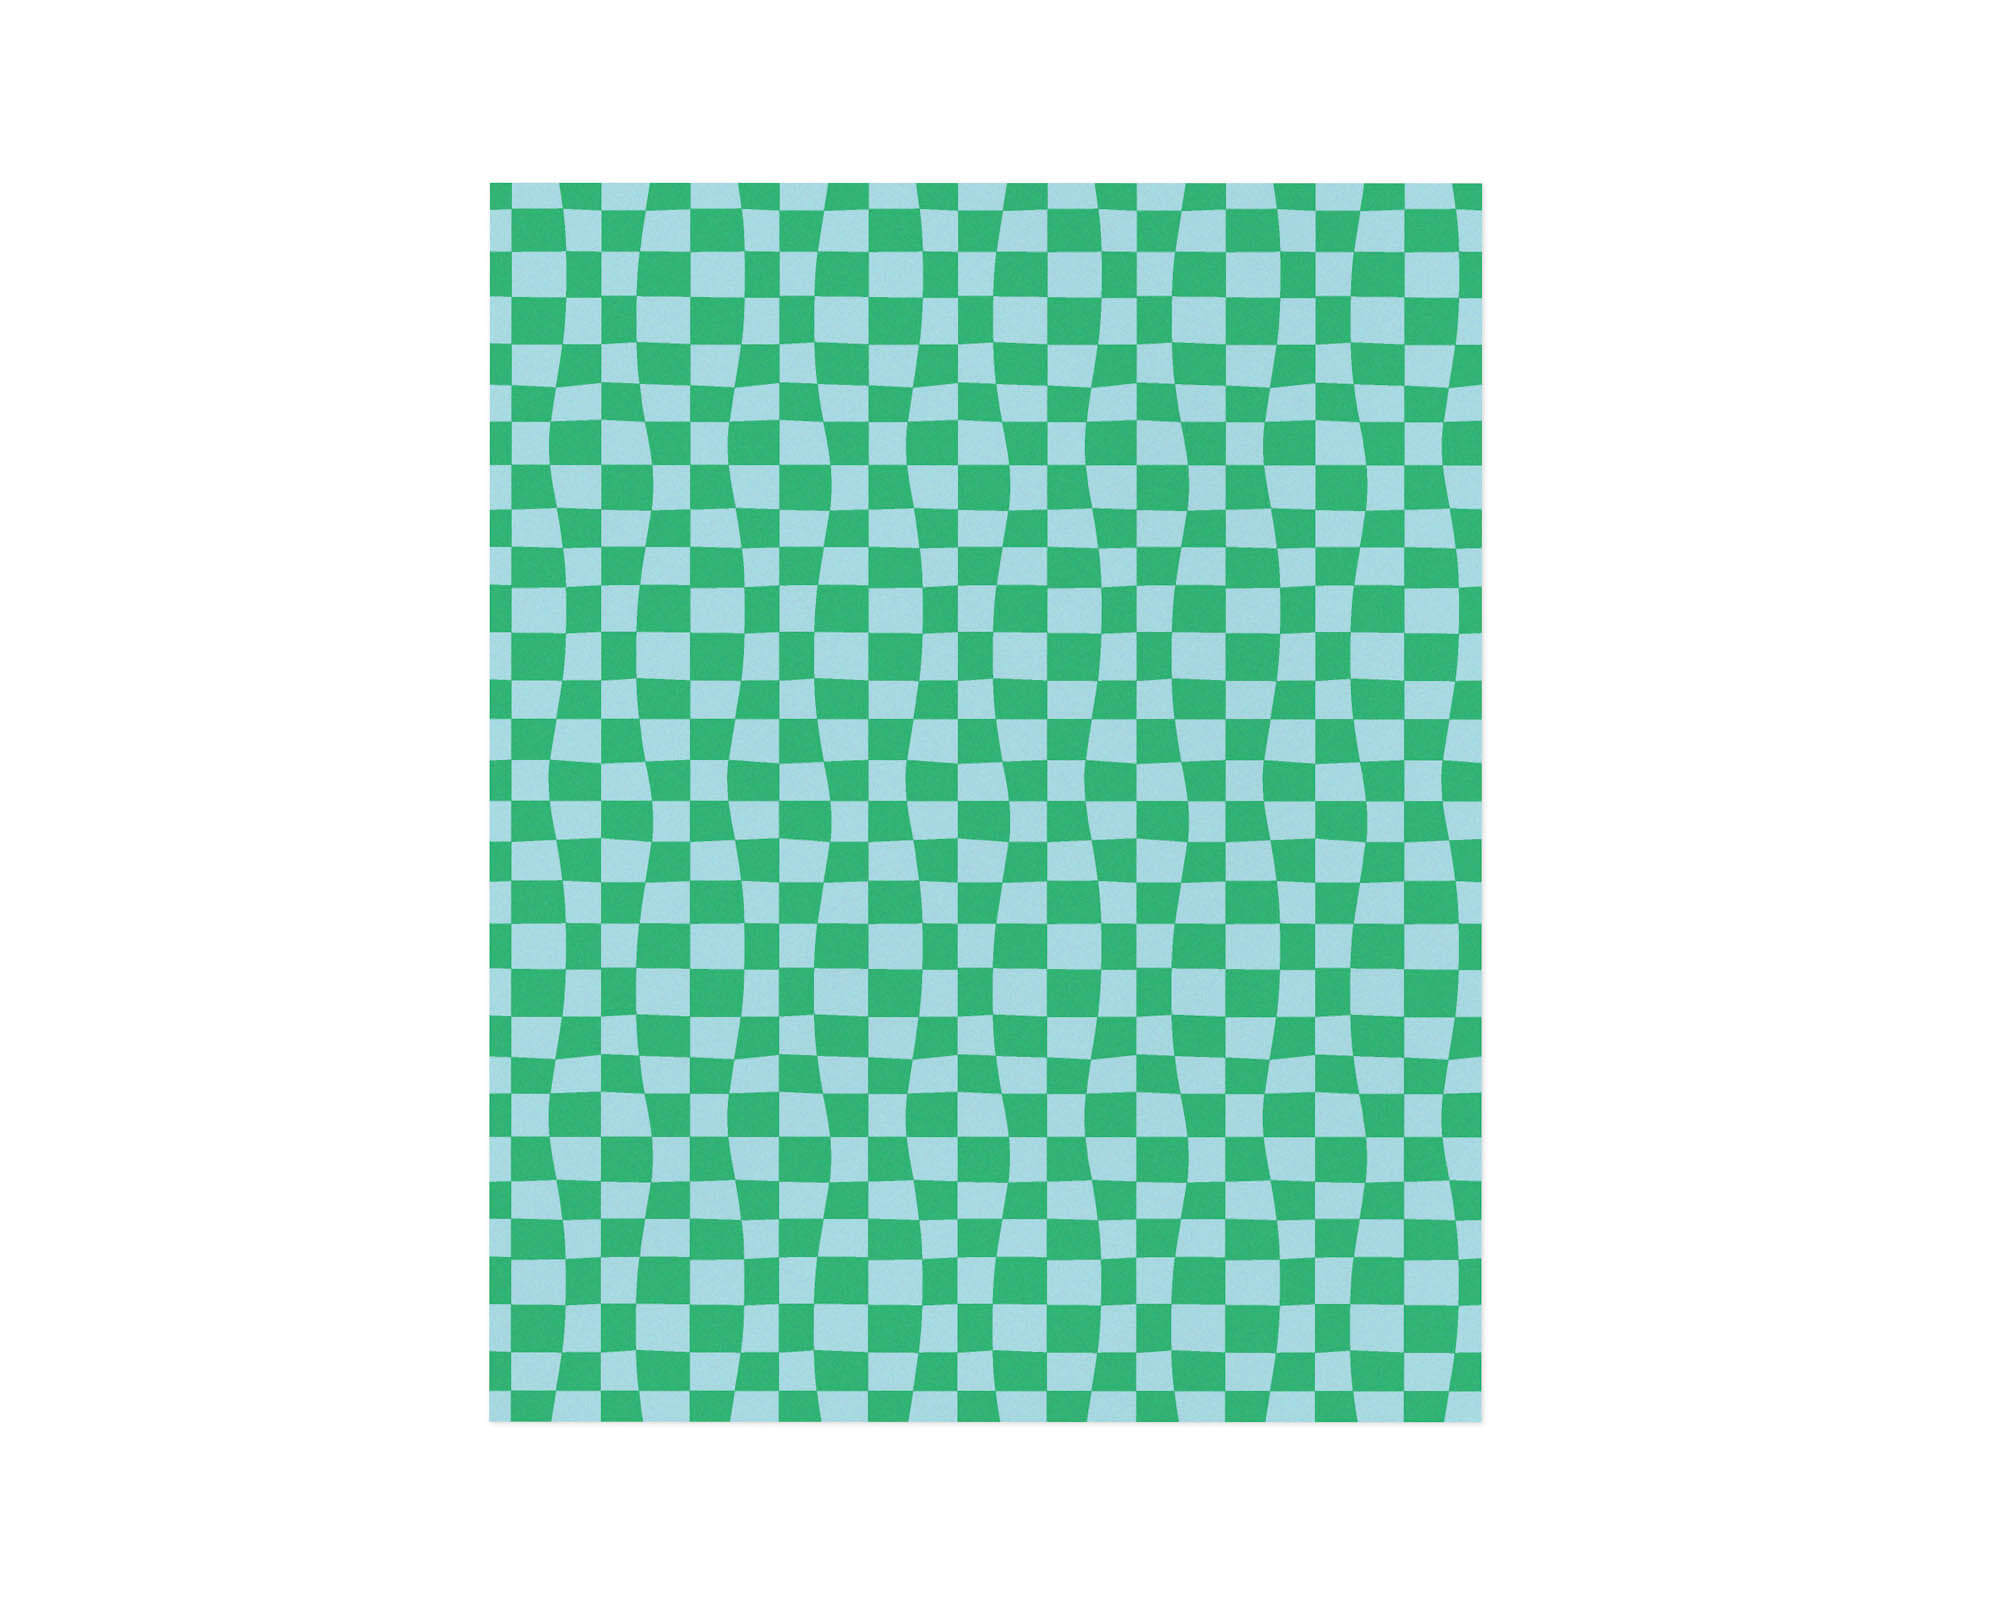 "Chunky Checker" archival giclée art print in a green and aqua wavy checkerboard pattern that bends space and time. Made in USA by My Darlin' @mydarlin_bk